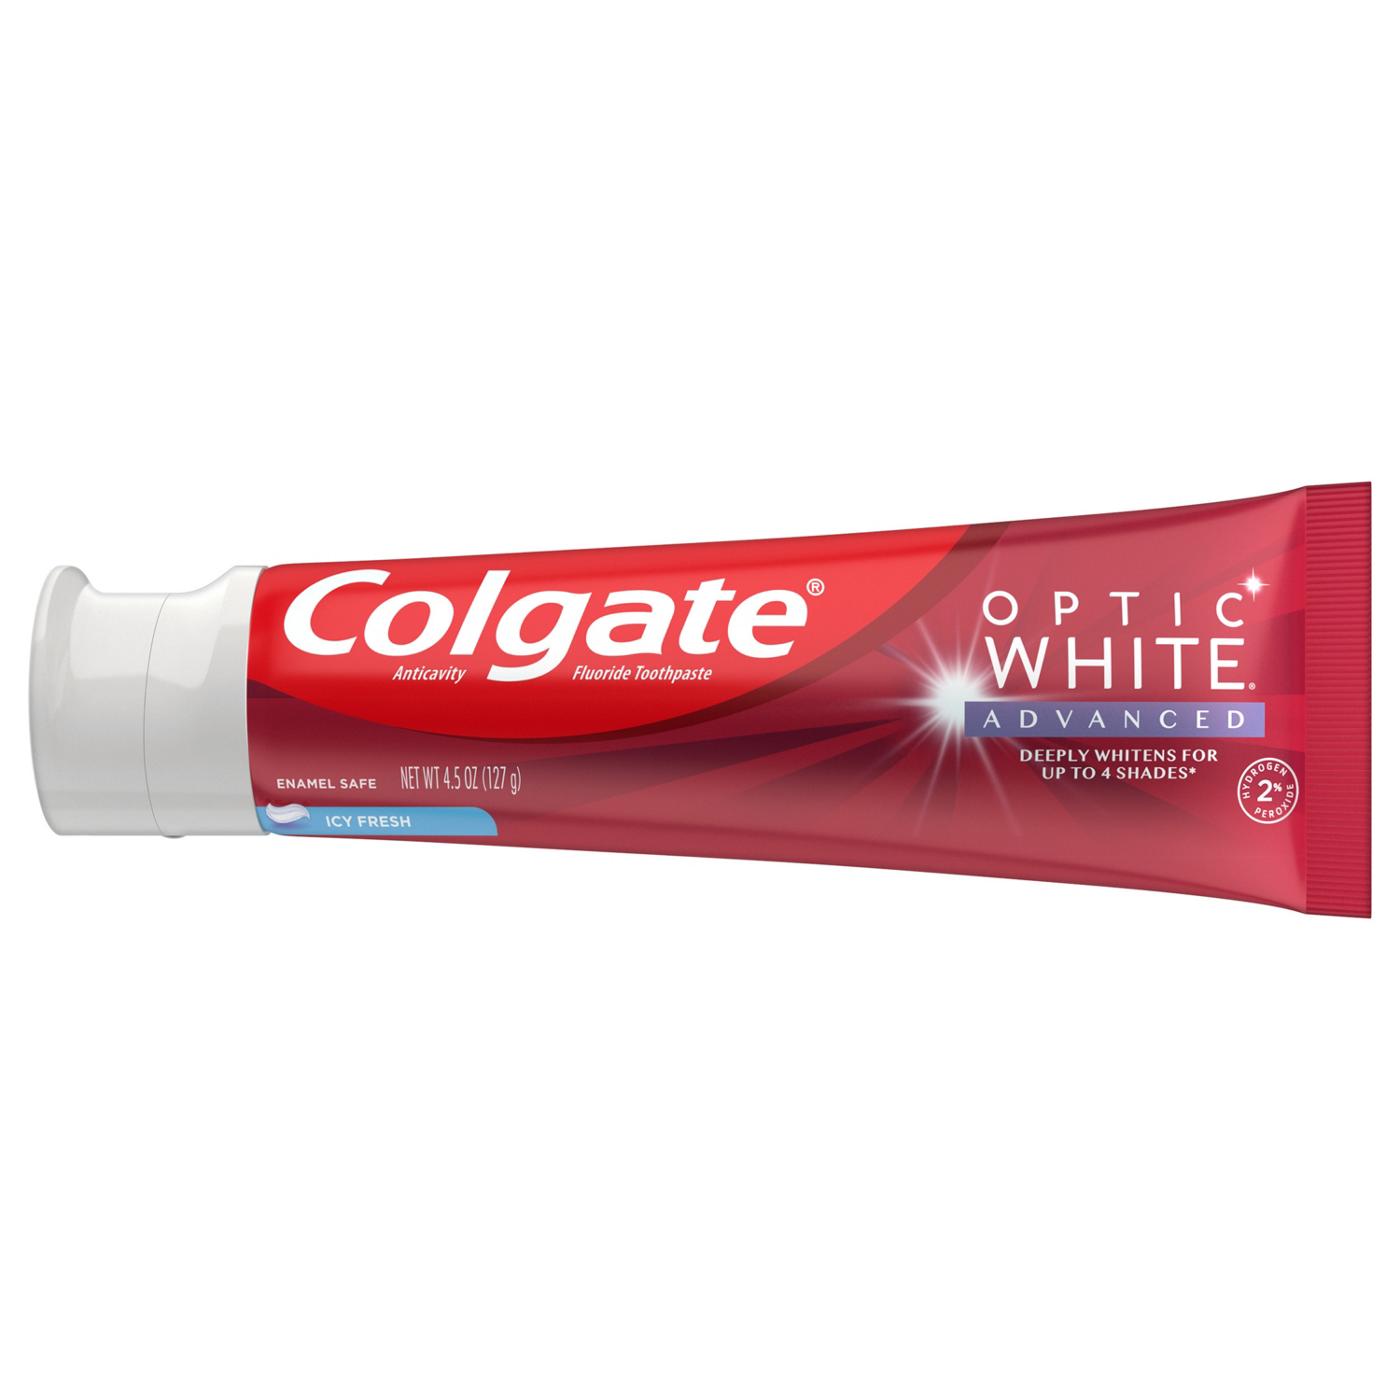 Colgate Optic White Advanced Anticavity Toothpaste - Icy Fresh; image 2 of 8